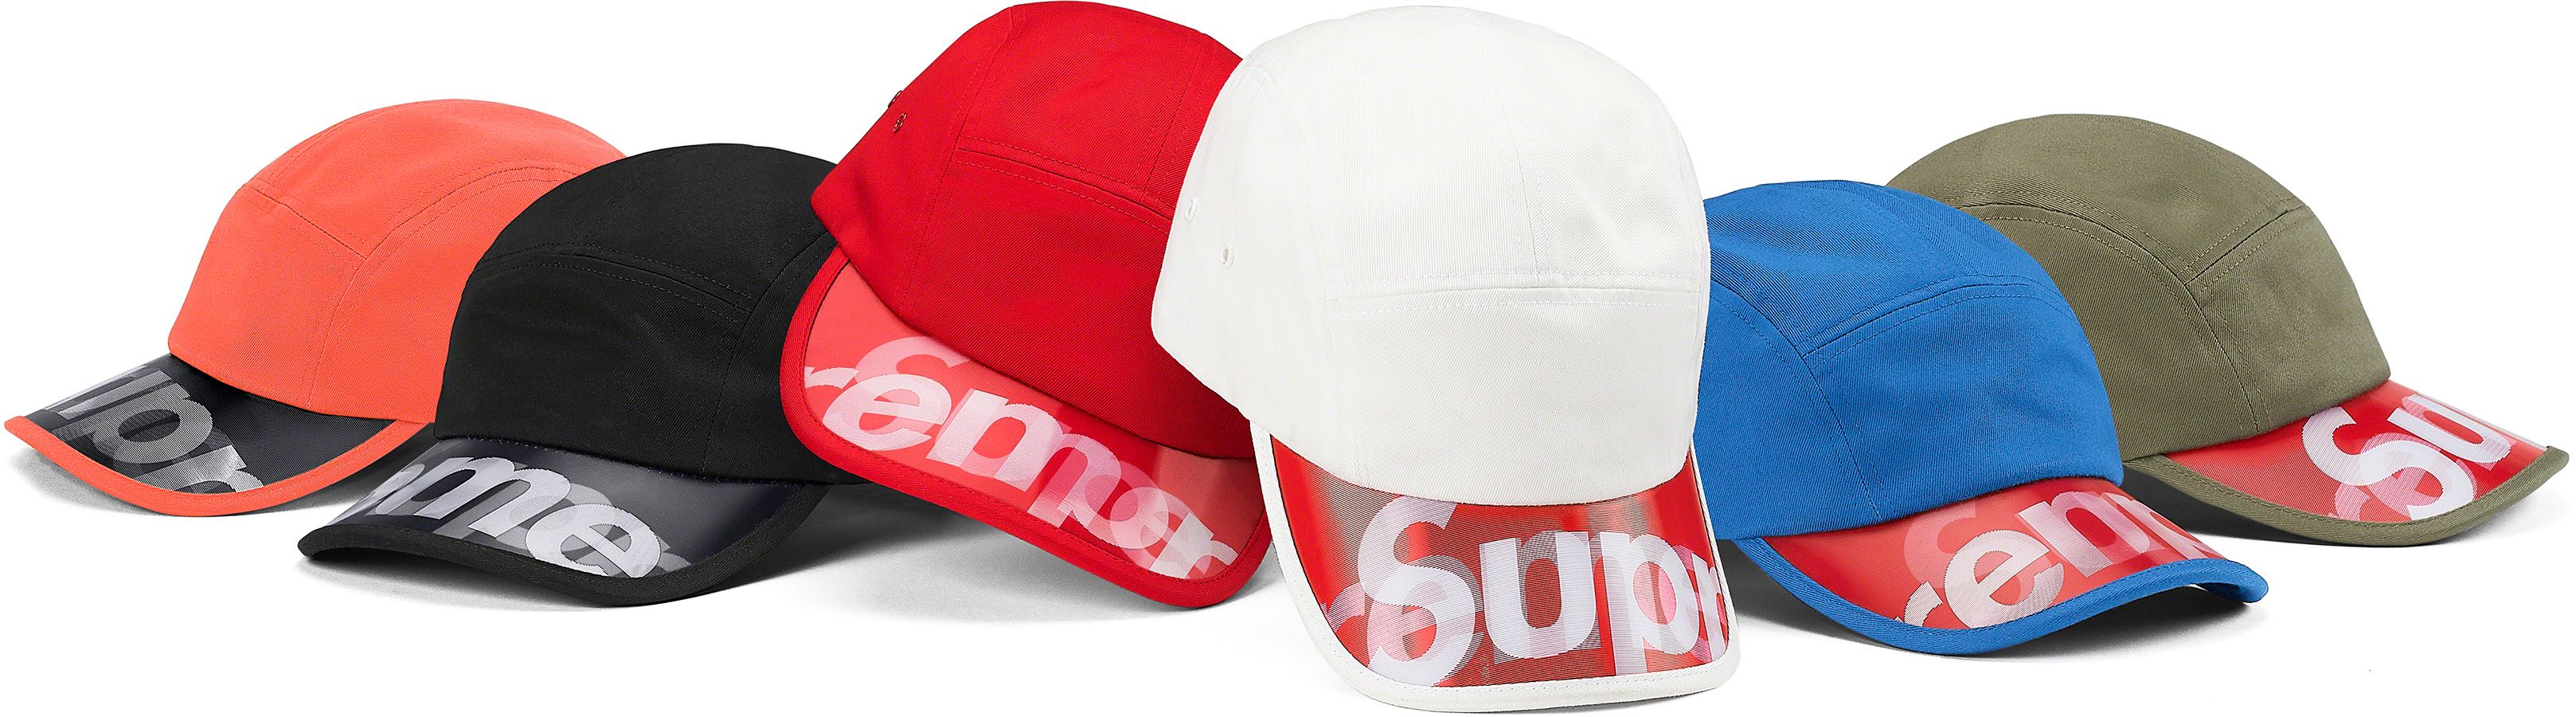 Field Camp Cap - Spring/Summer 2020 Preview – Supreme